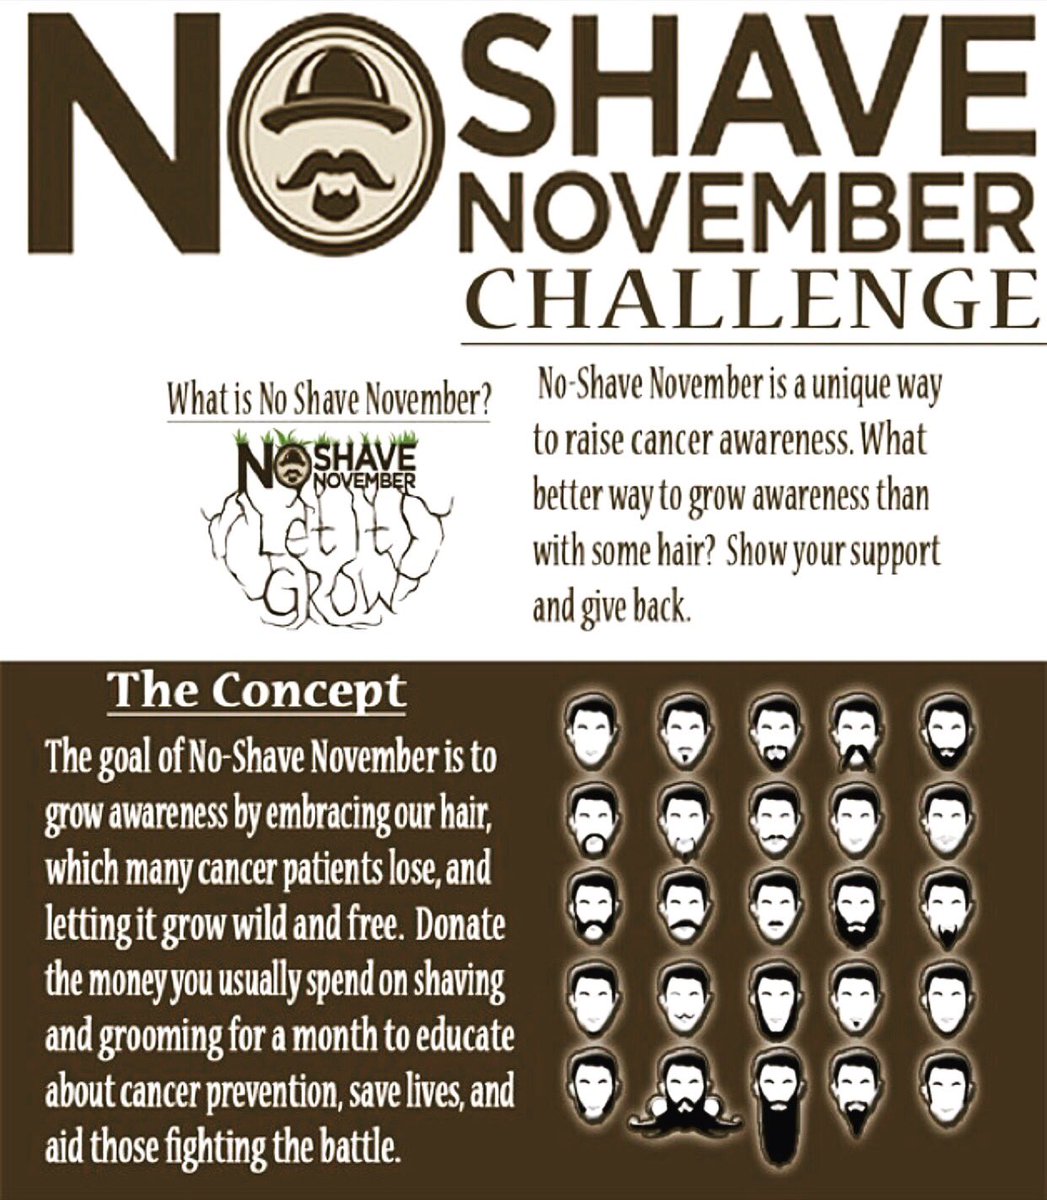 @No_Shave #November is about to start, have you joined no-shave.org/team/ronsmitty… yet to #Letitgrow for @AmericanCancer? #CancerSucks #Noshave